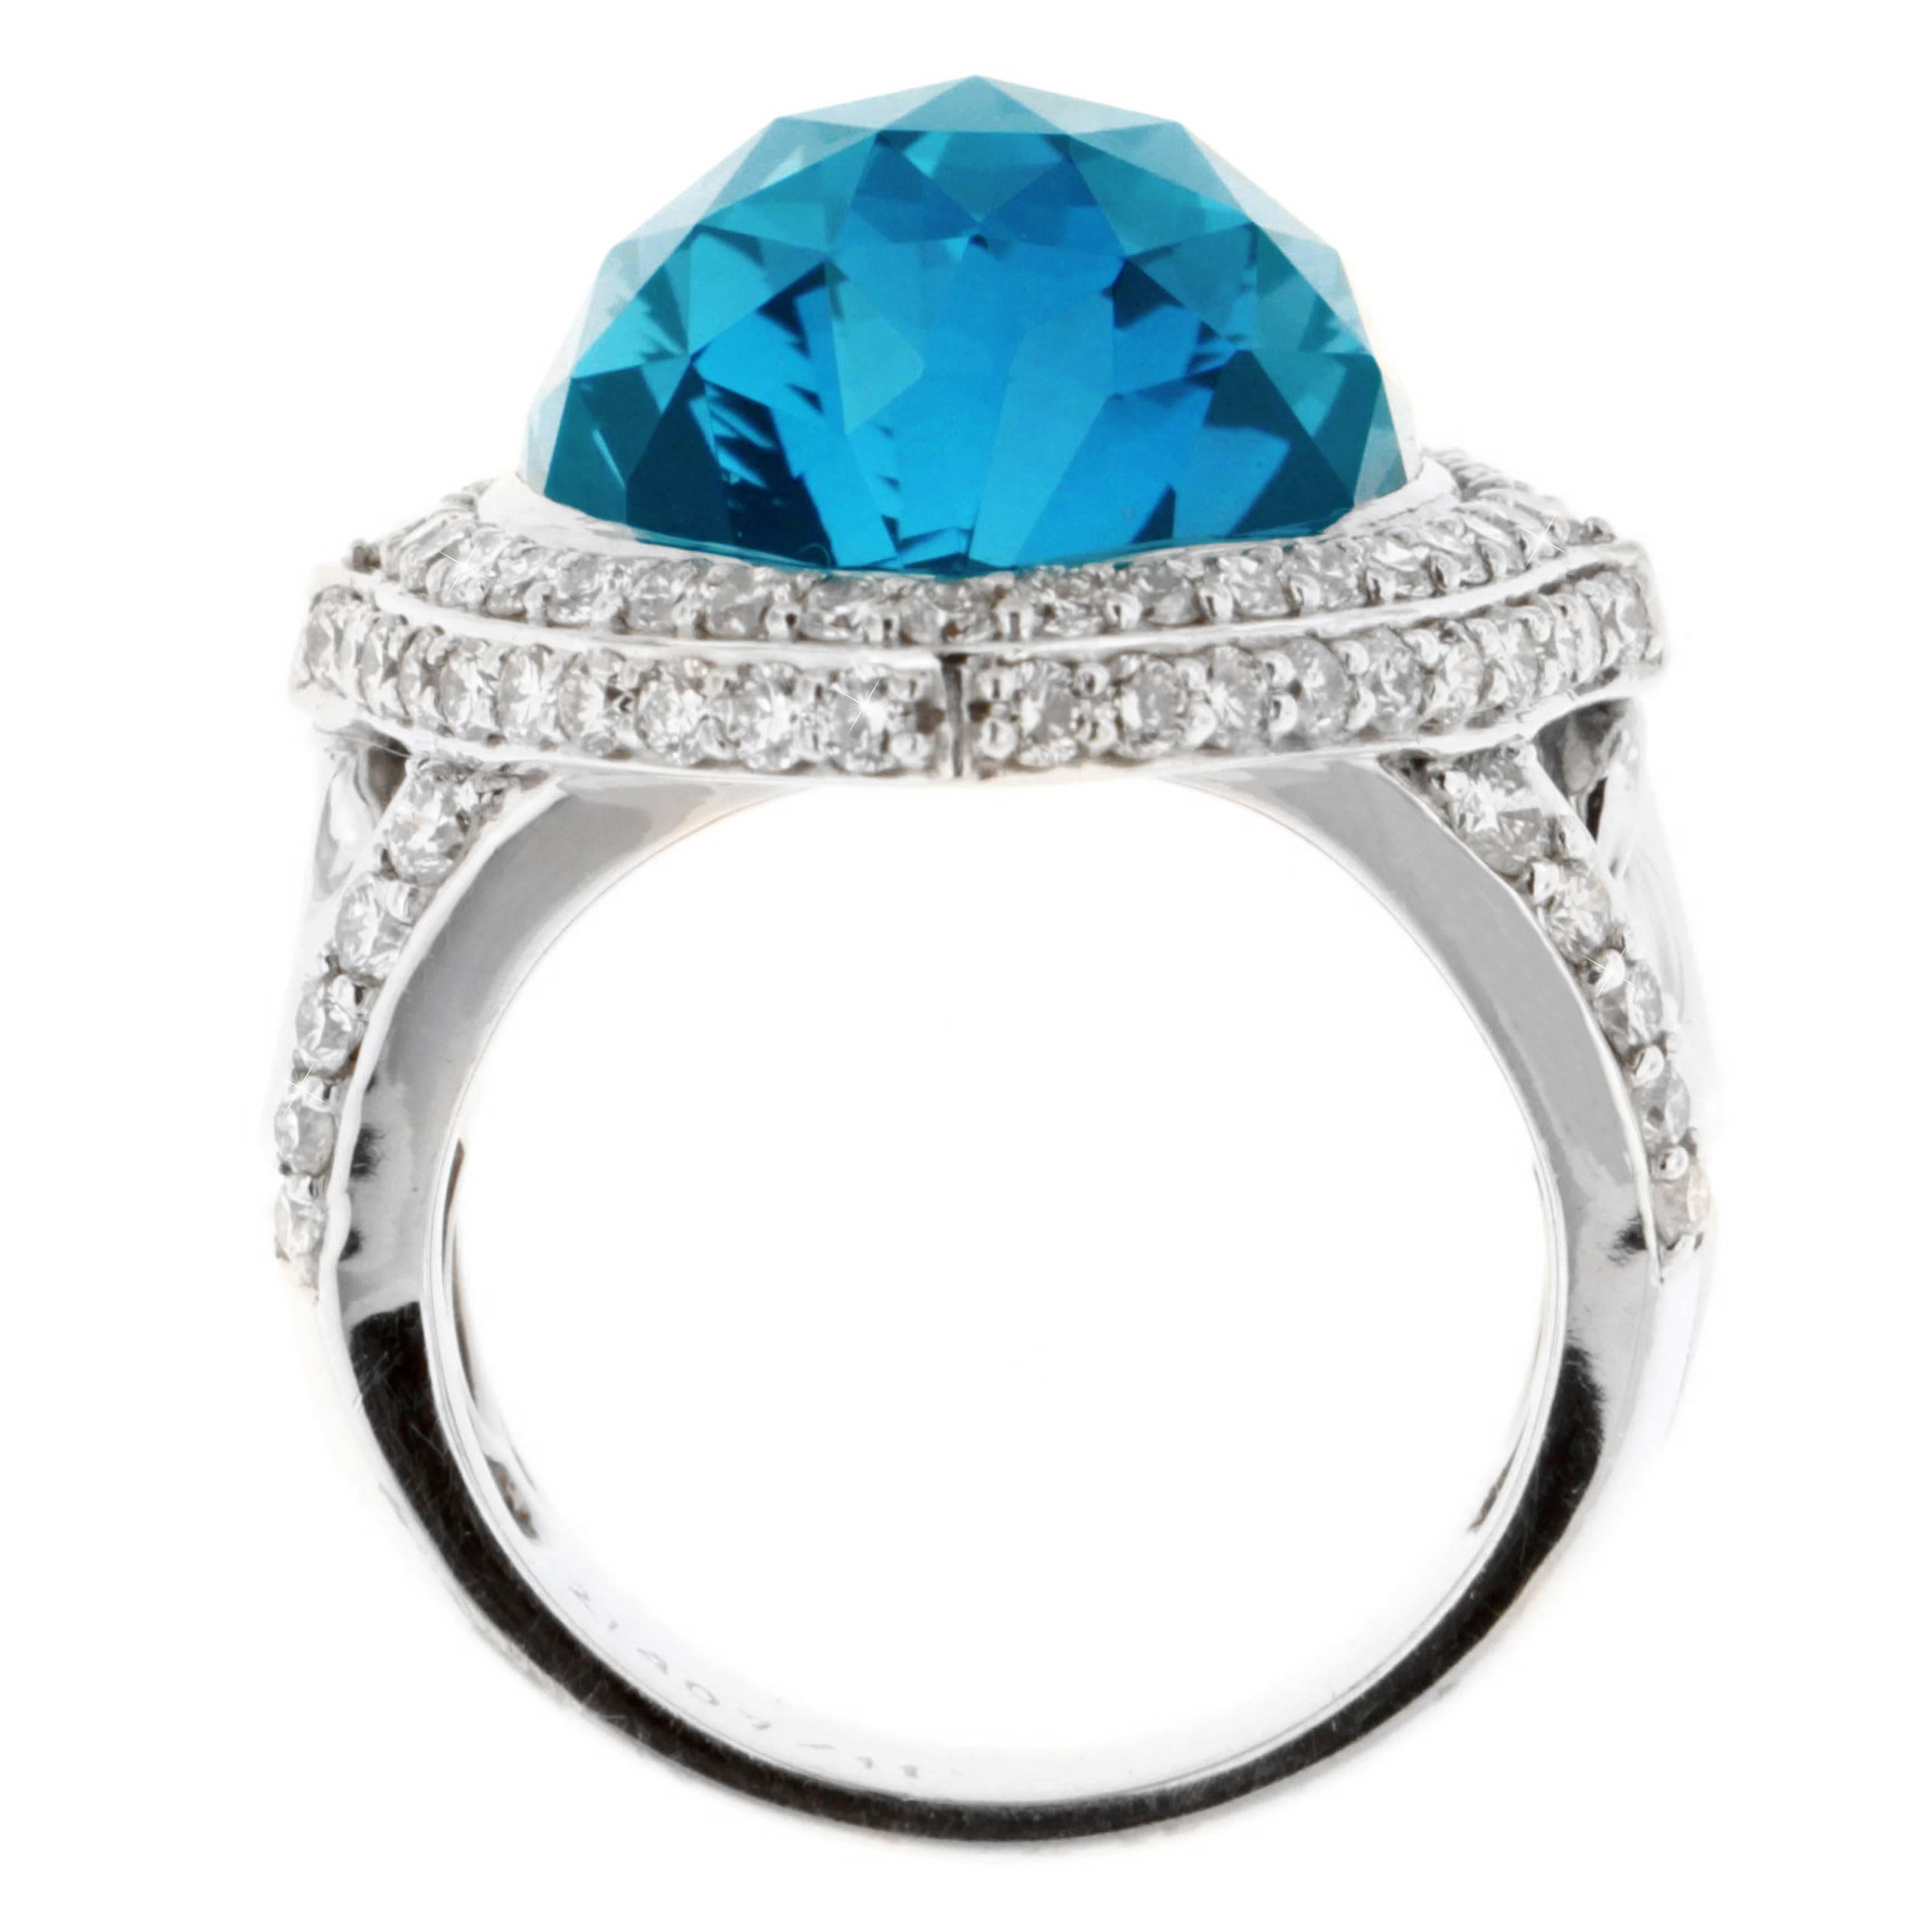 Shine in the vitreous luster of Zorab's striking London Blue Topaze cocktail ring weighing  22.90 Carats, surrounded by 1.96 Carats of White Diamonds and set on 18 Karat Gold and Palladium.

This item has a serial number and bears the stamp of